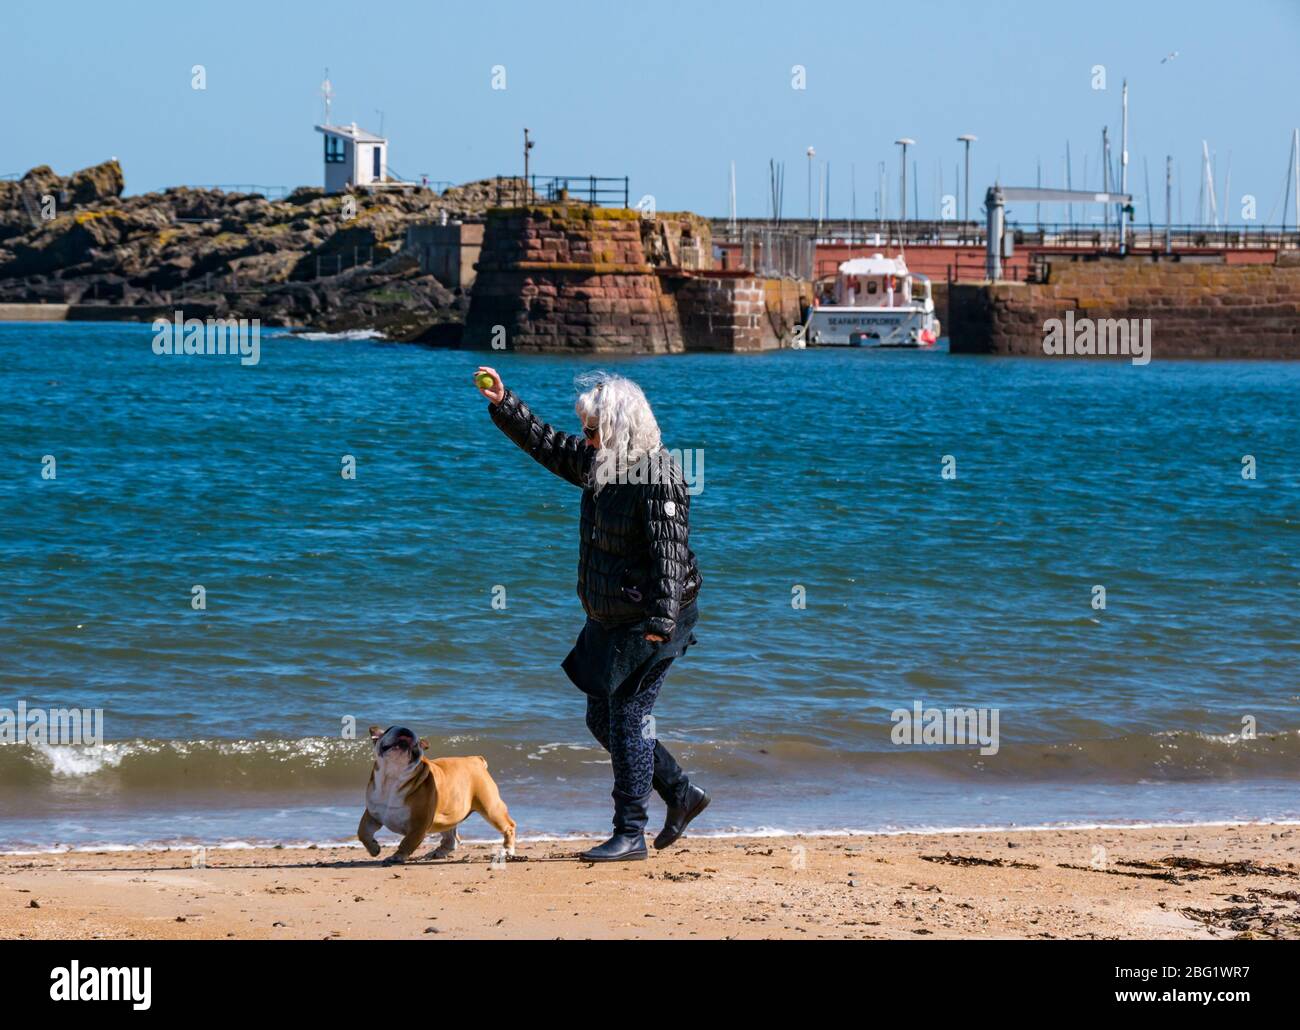 North Berwick, East Lothian, Scotland, United Kingdom. 20th April 2020. UK Weather: Sunshine and a completely clear blue sky in the seaside town but the beautiful beaches are almost deserted with the few people exercising maintaining an appropriate social distance. A woman walking with a dog on the beach Stock Photo